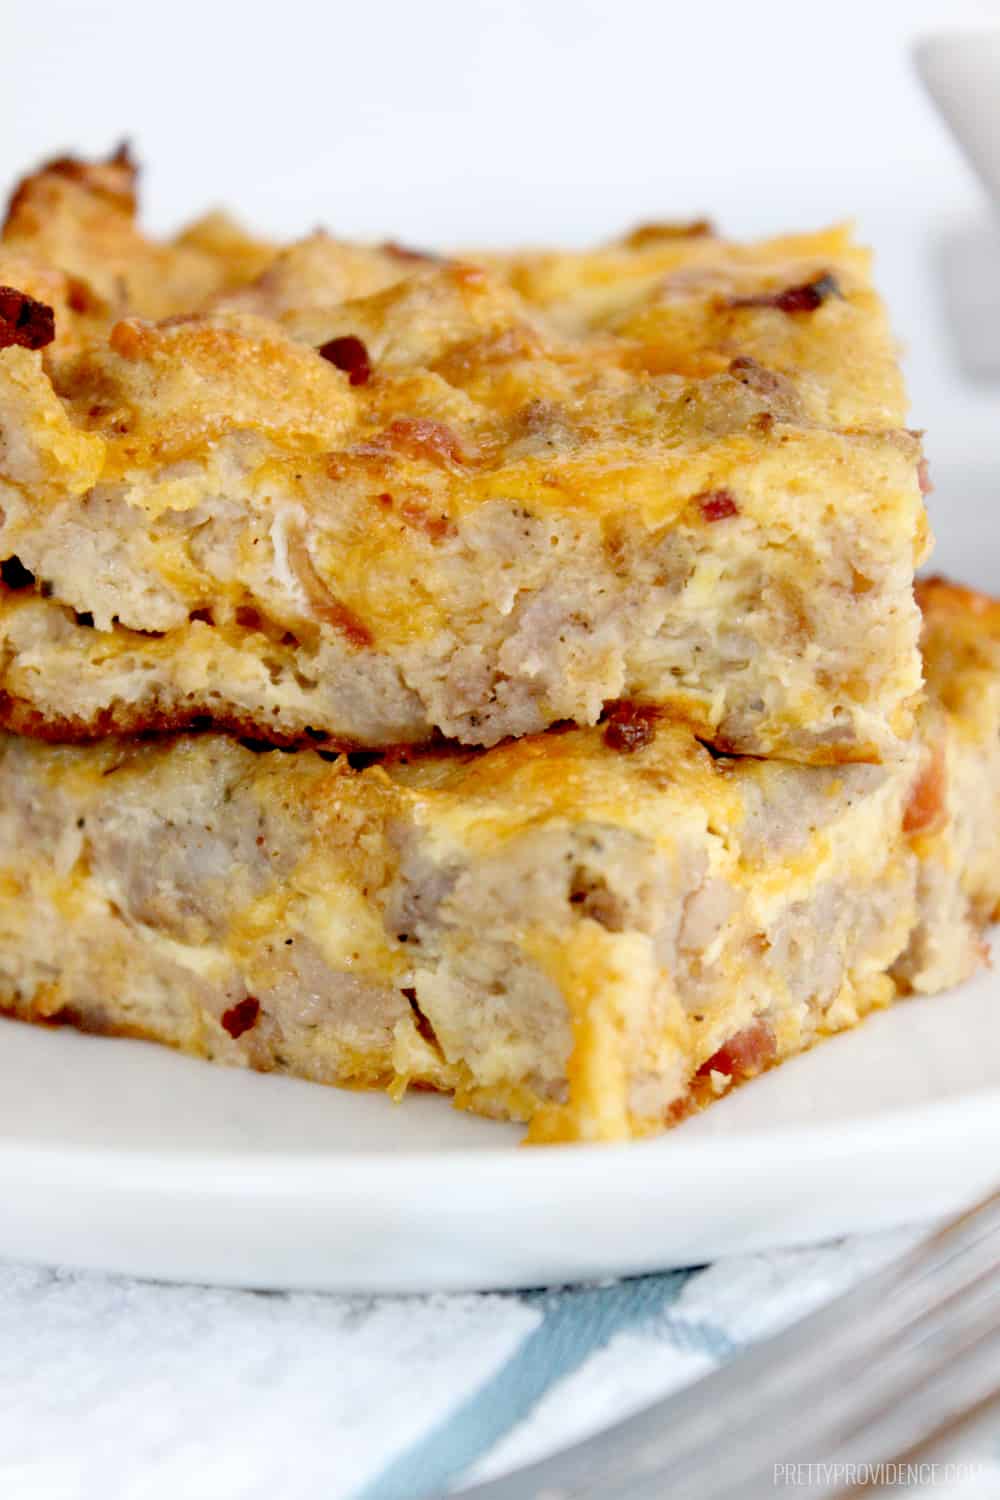 Prepare the night before, pop into the oven in the morning and enjoy breakfast heaven! This overnight breakfast casserole can't be beat! 